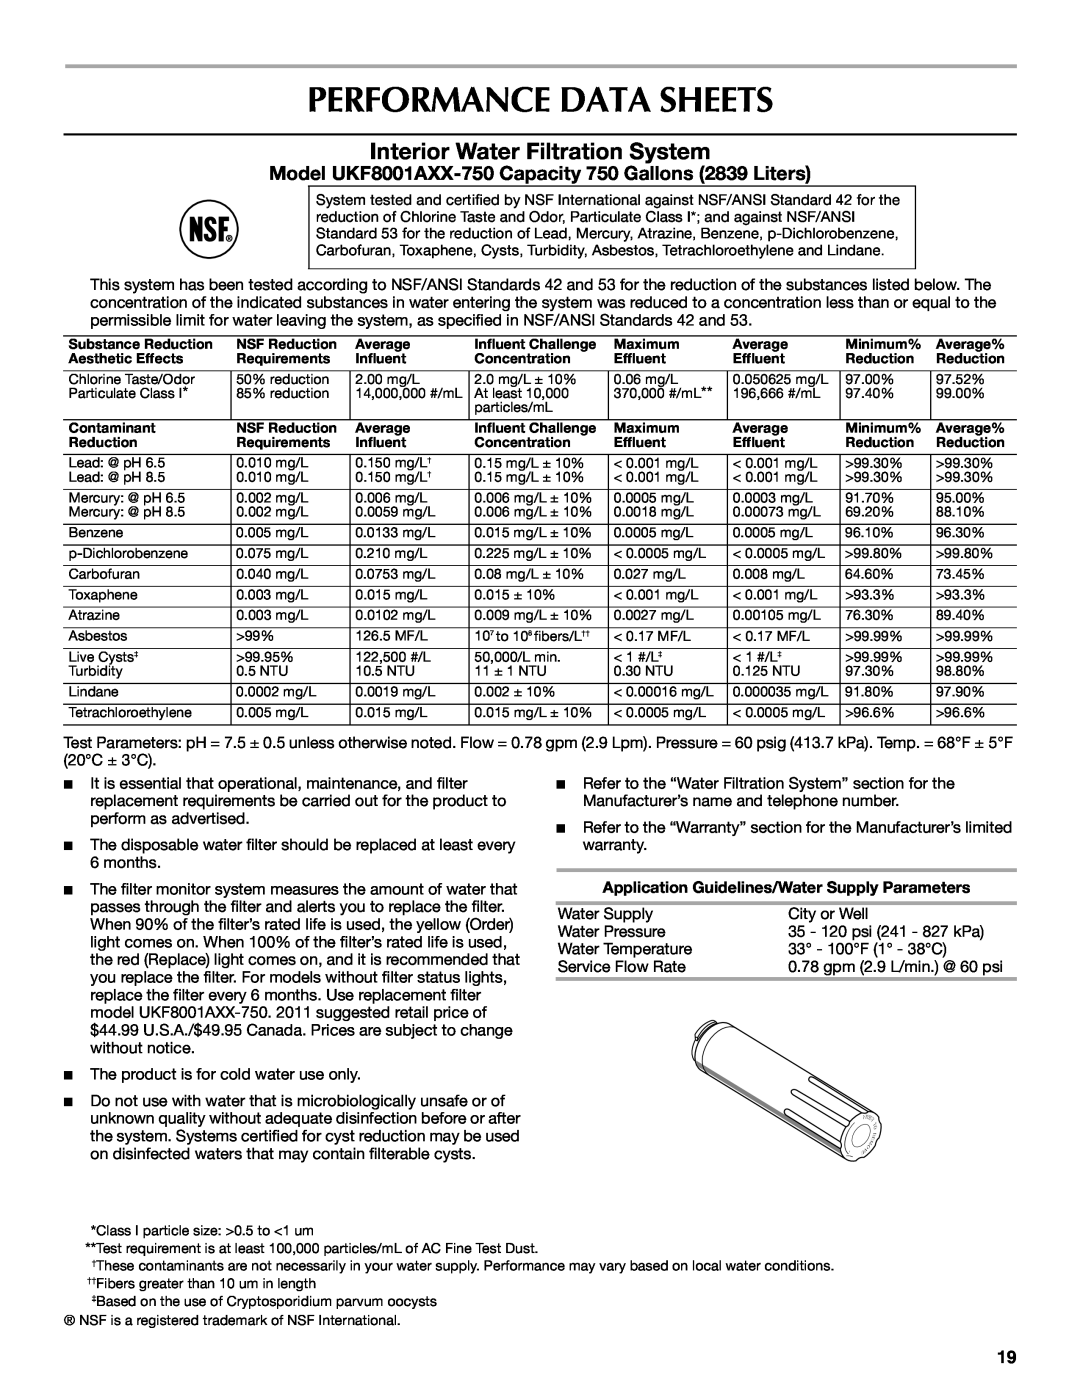 Maytag W10366206A installation instructions Performance Data Sheets, Interior Water Filtration System 